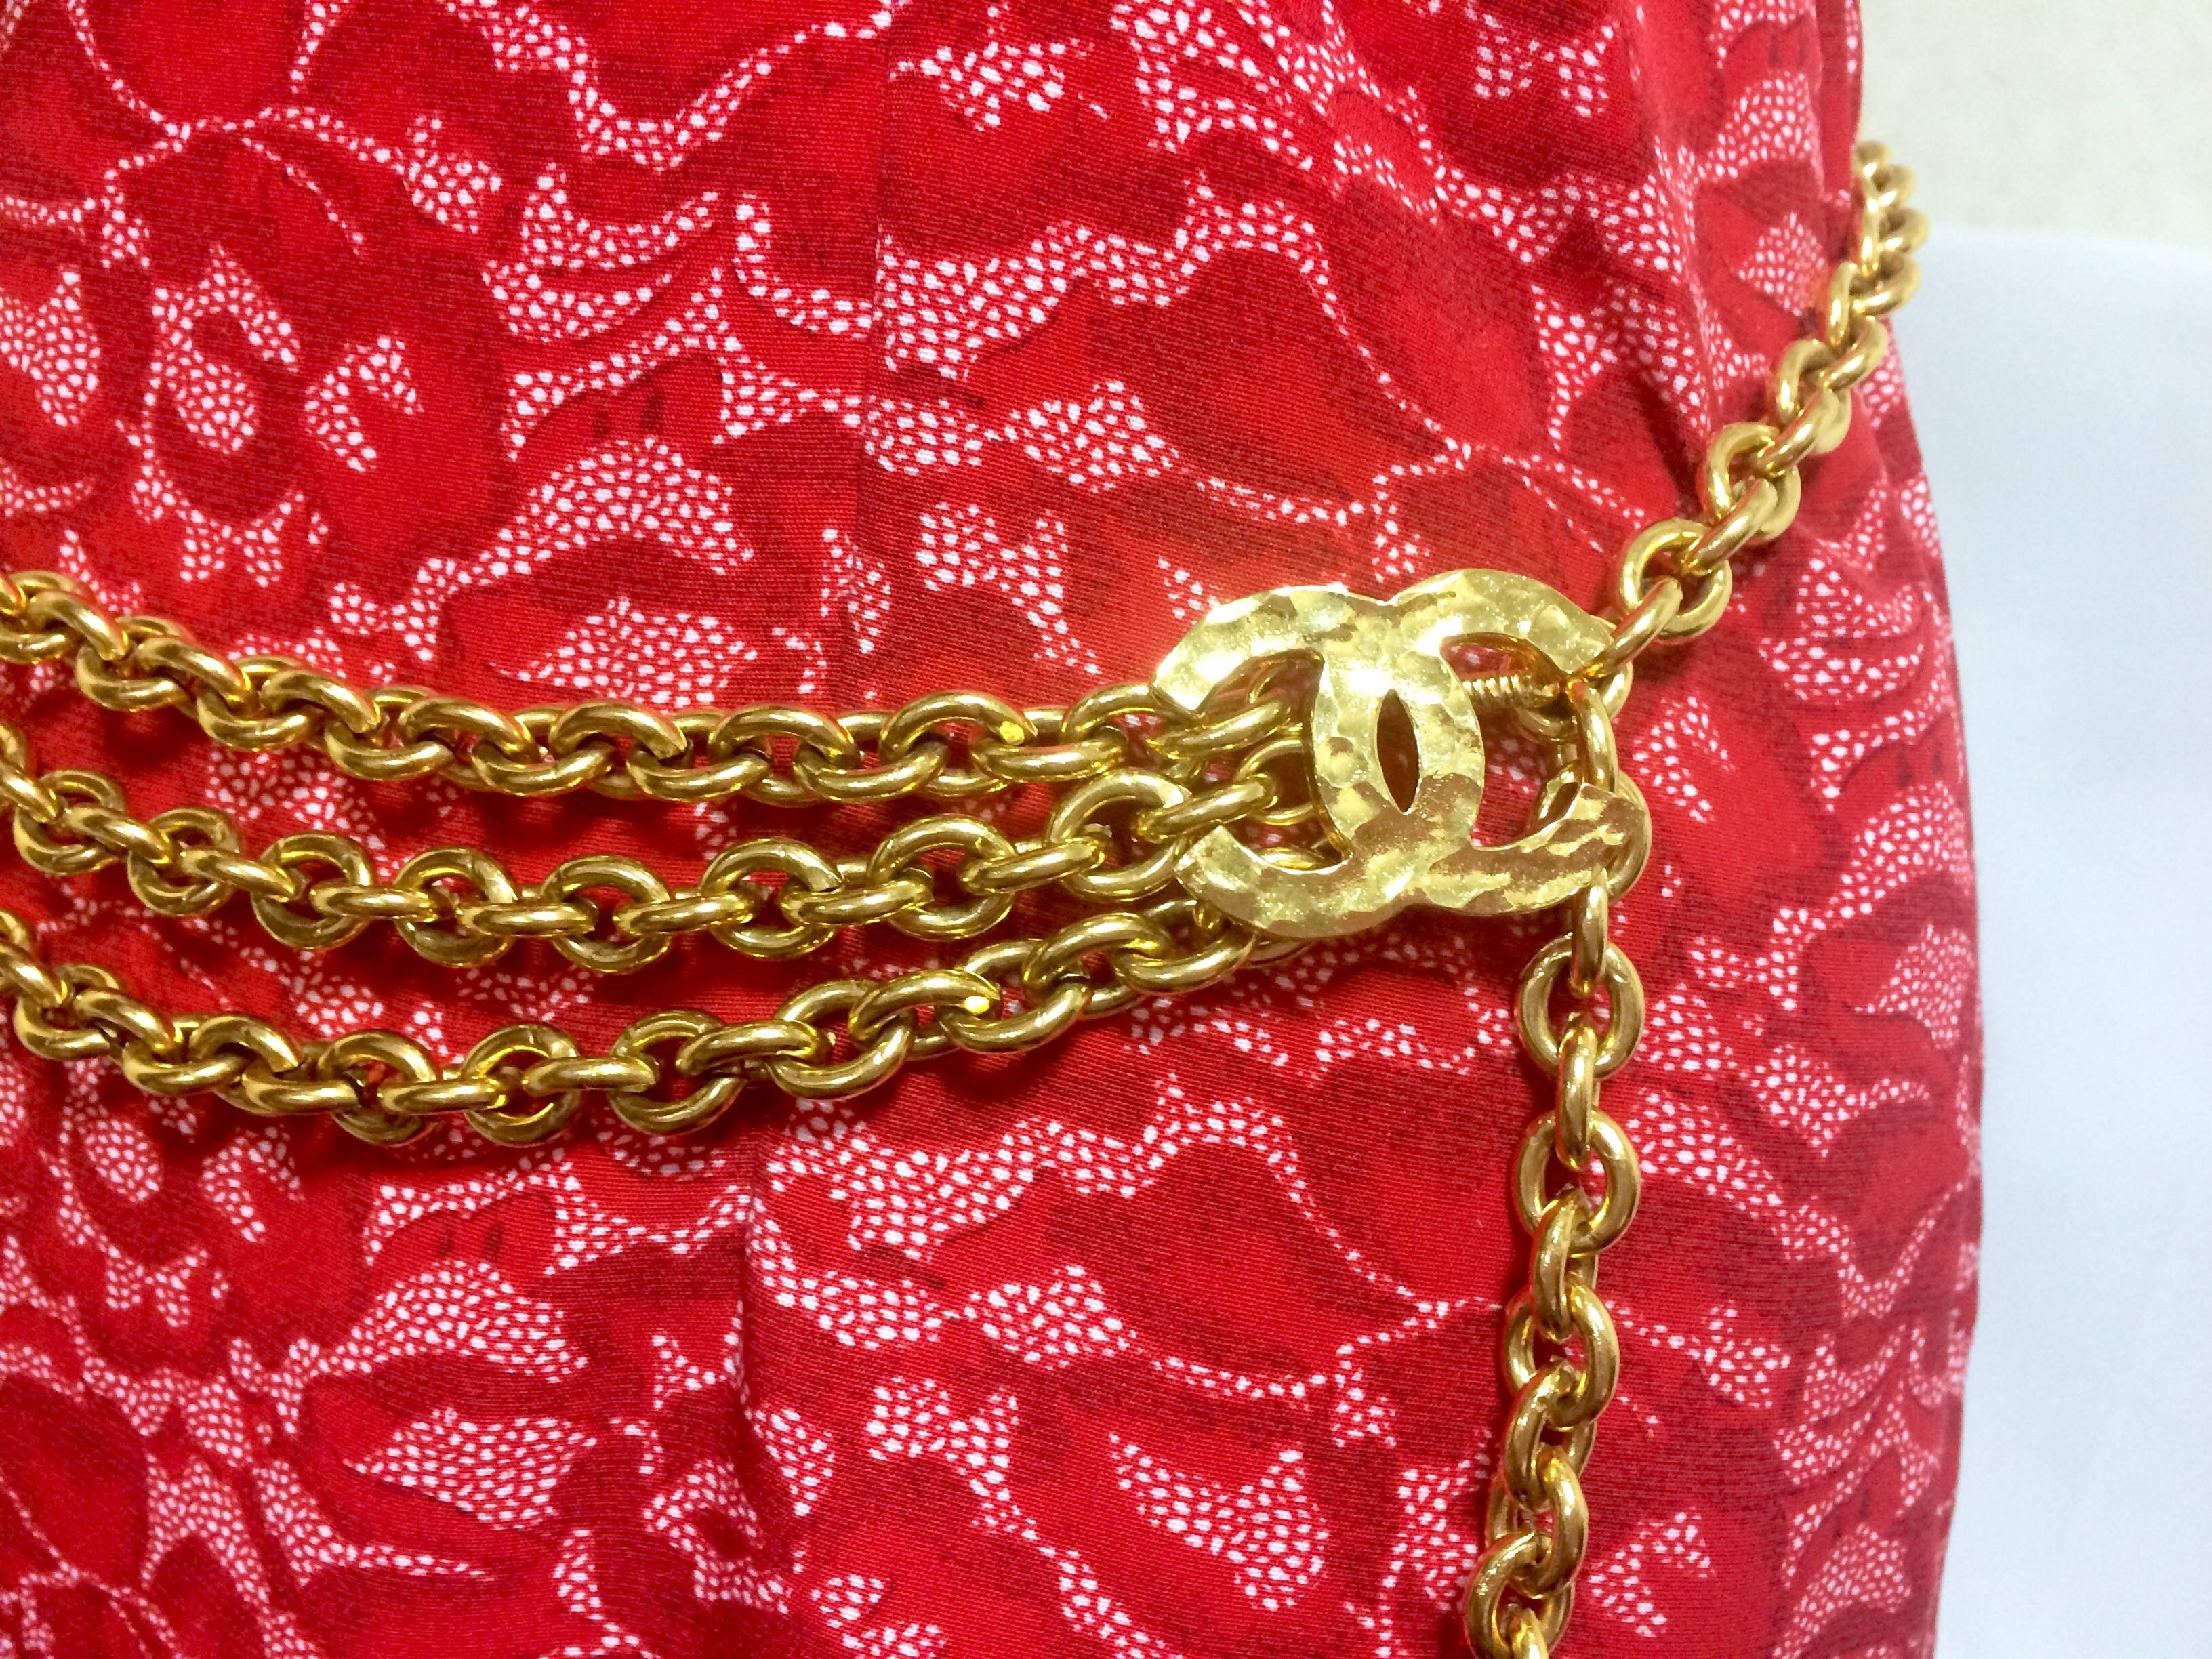 Beige MINT. Vintage CHANEL golden chain belt with triple layer chains and 3 CC marks